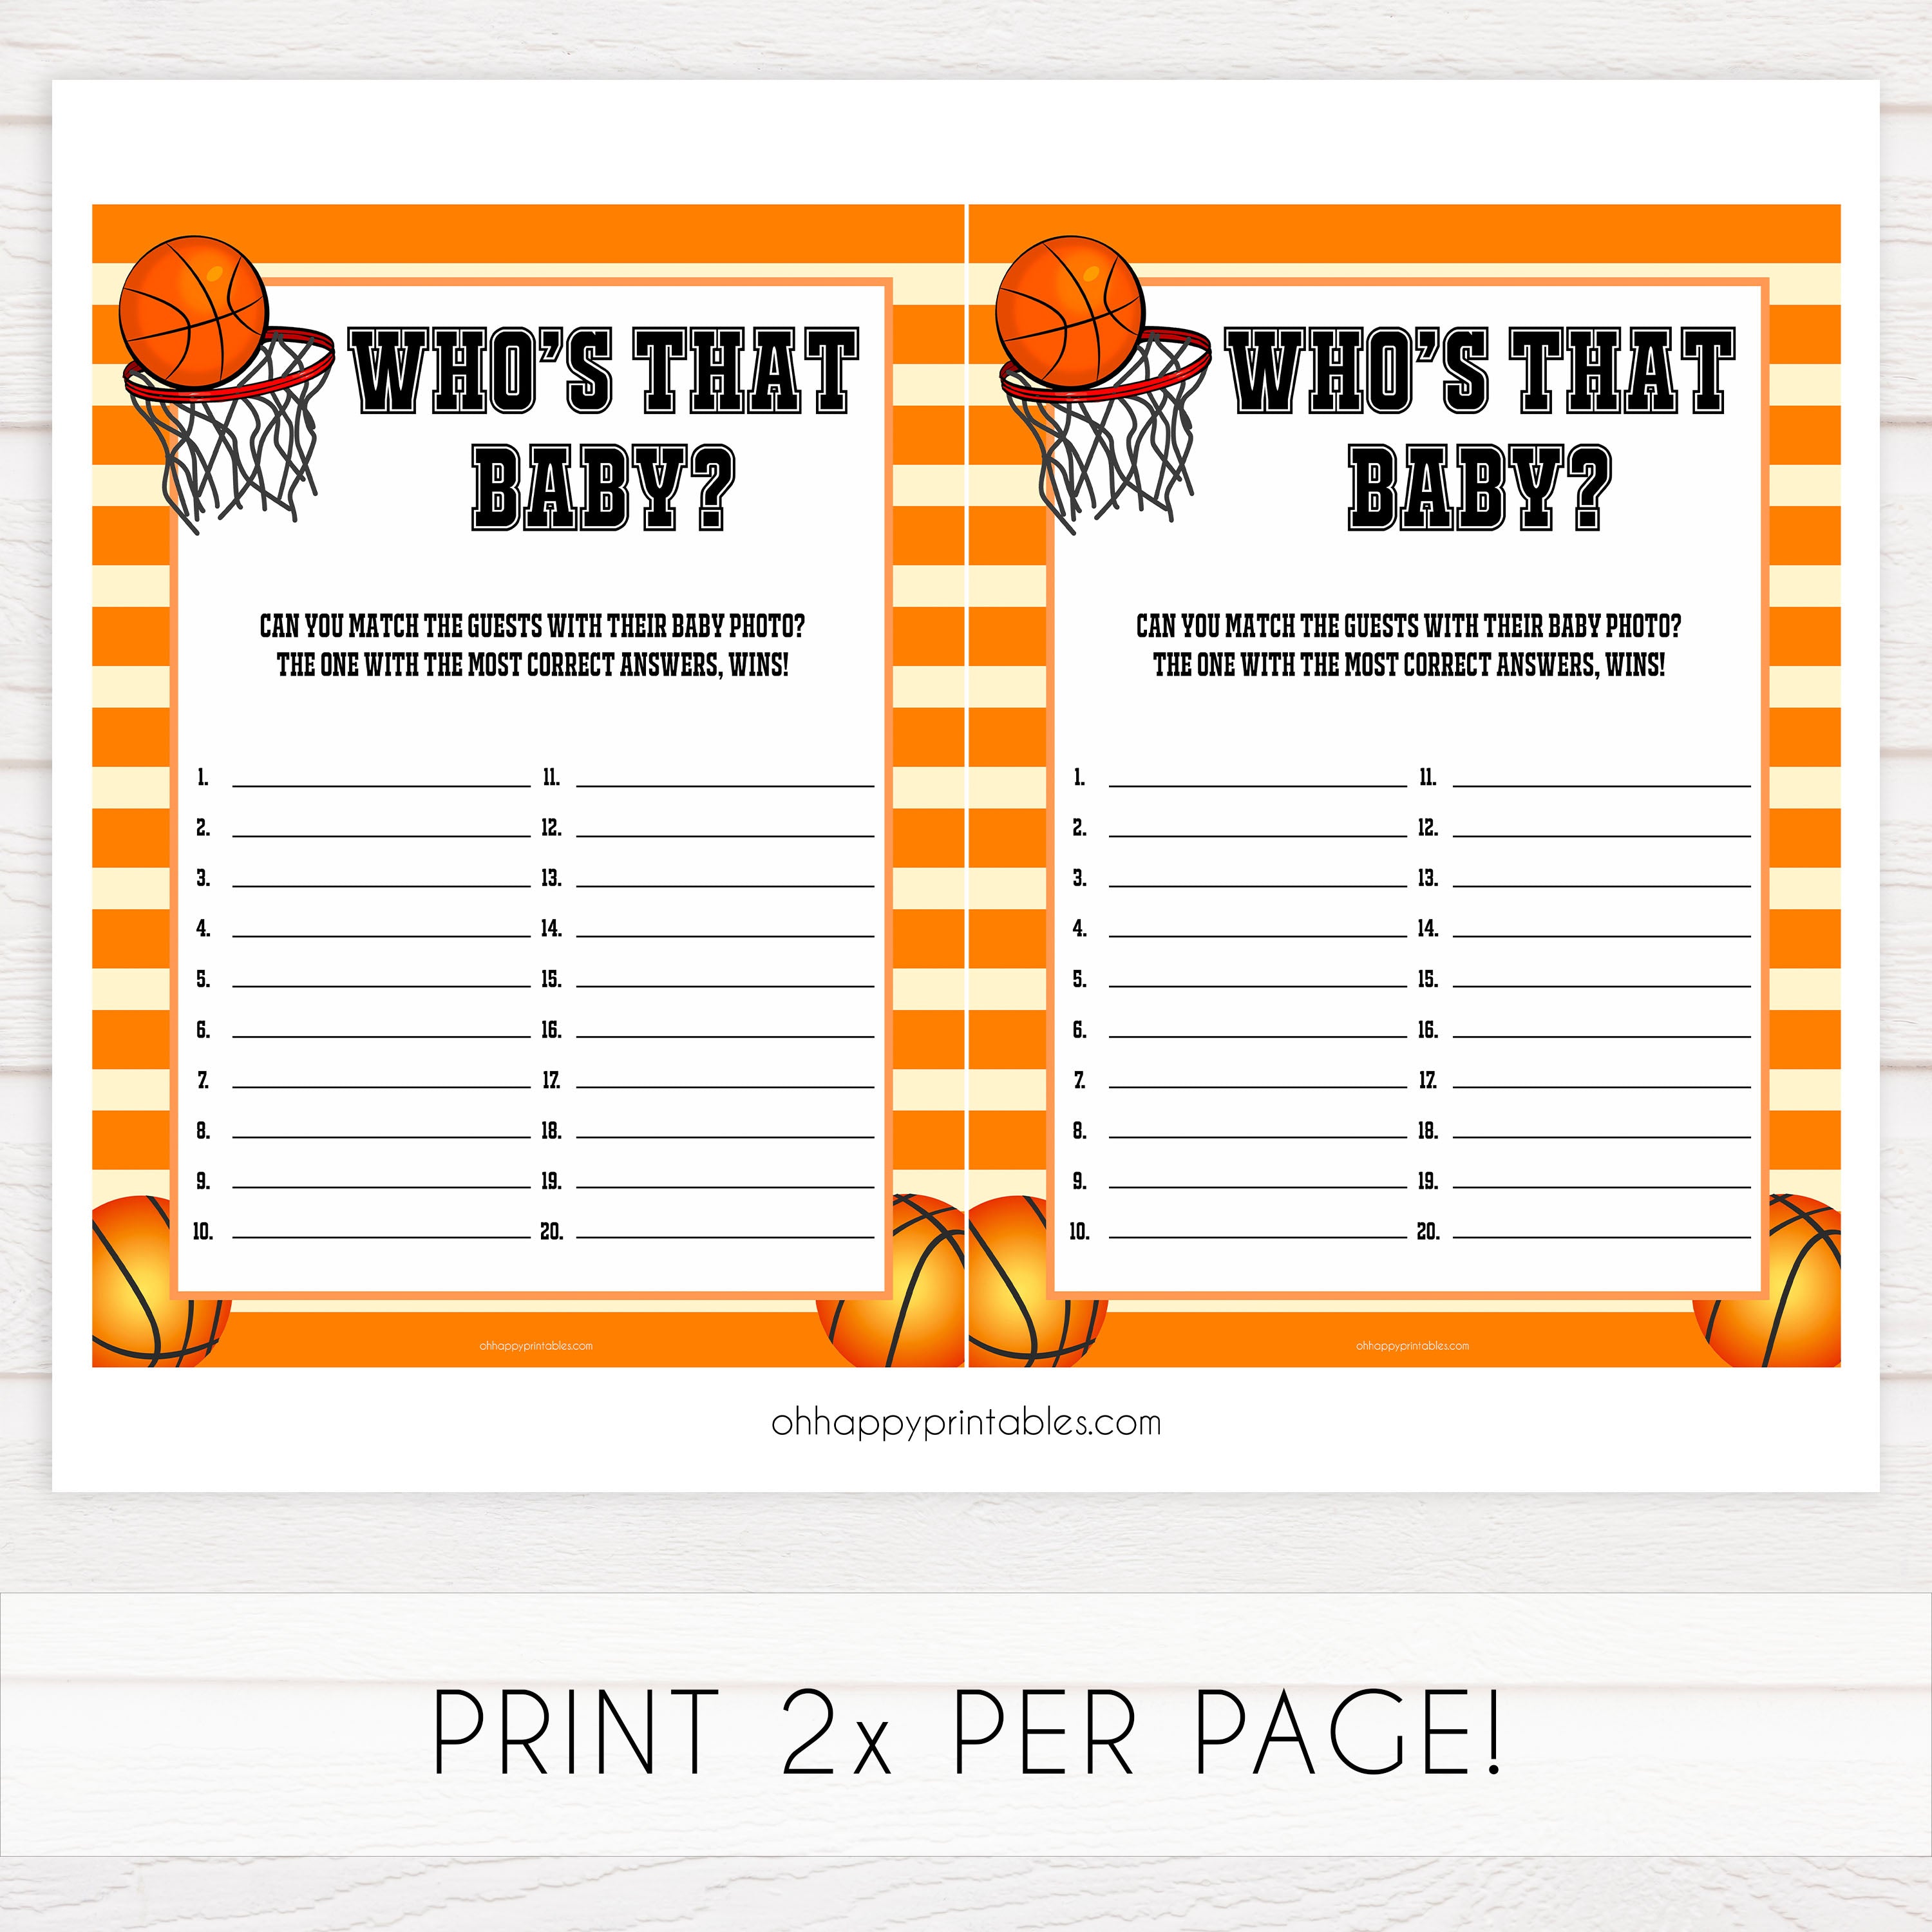 whos that baby game, guess the baby photo game,Printable baby shower games, basketball fun baby games, baby shower games, fun baby shower ideas, top baby shower ideas, basketball baby shower, basketball baby shower ideas